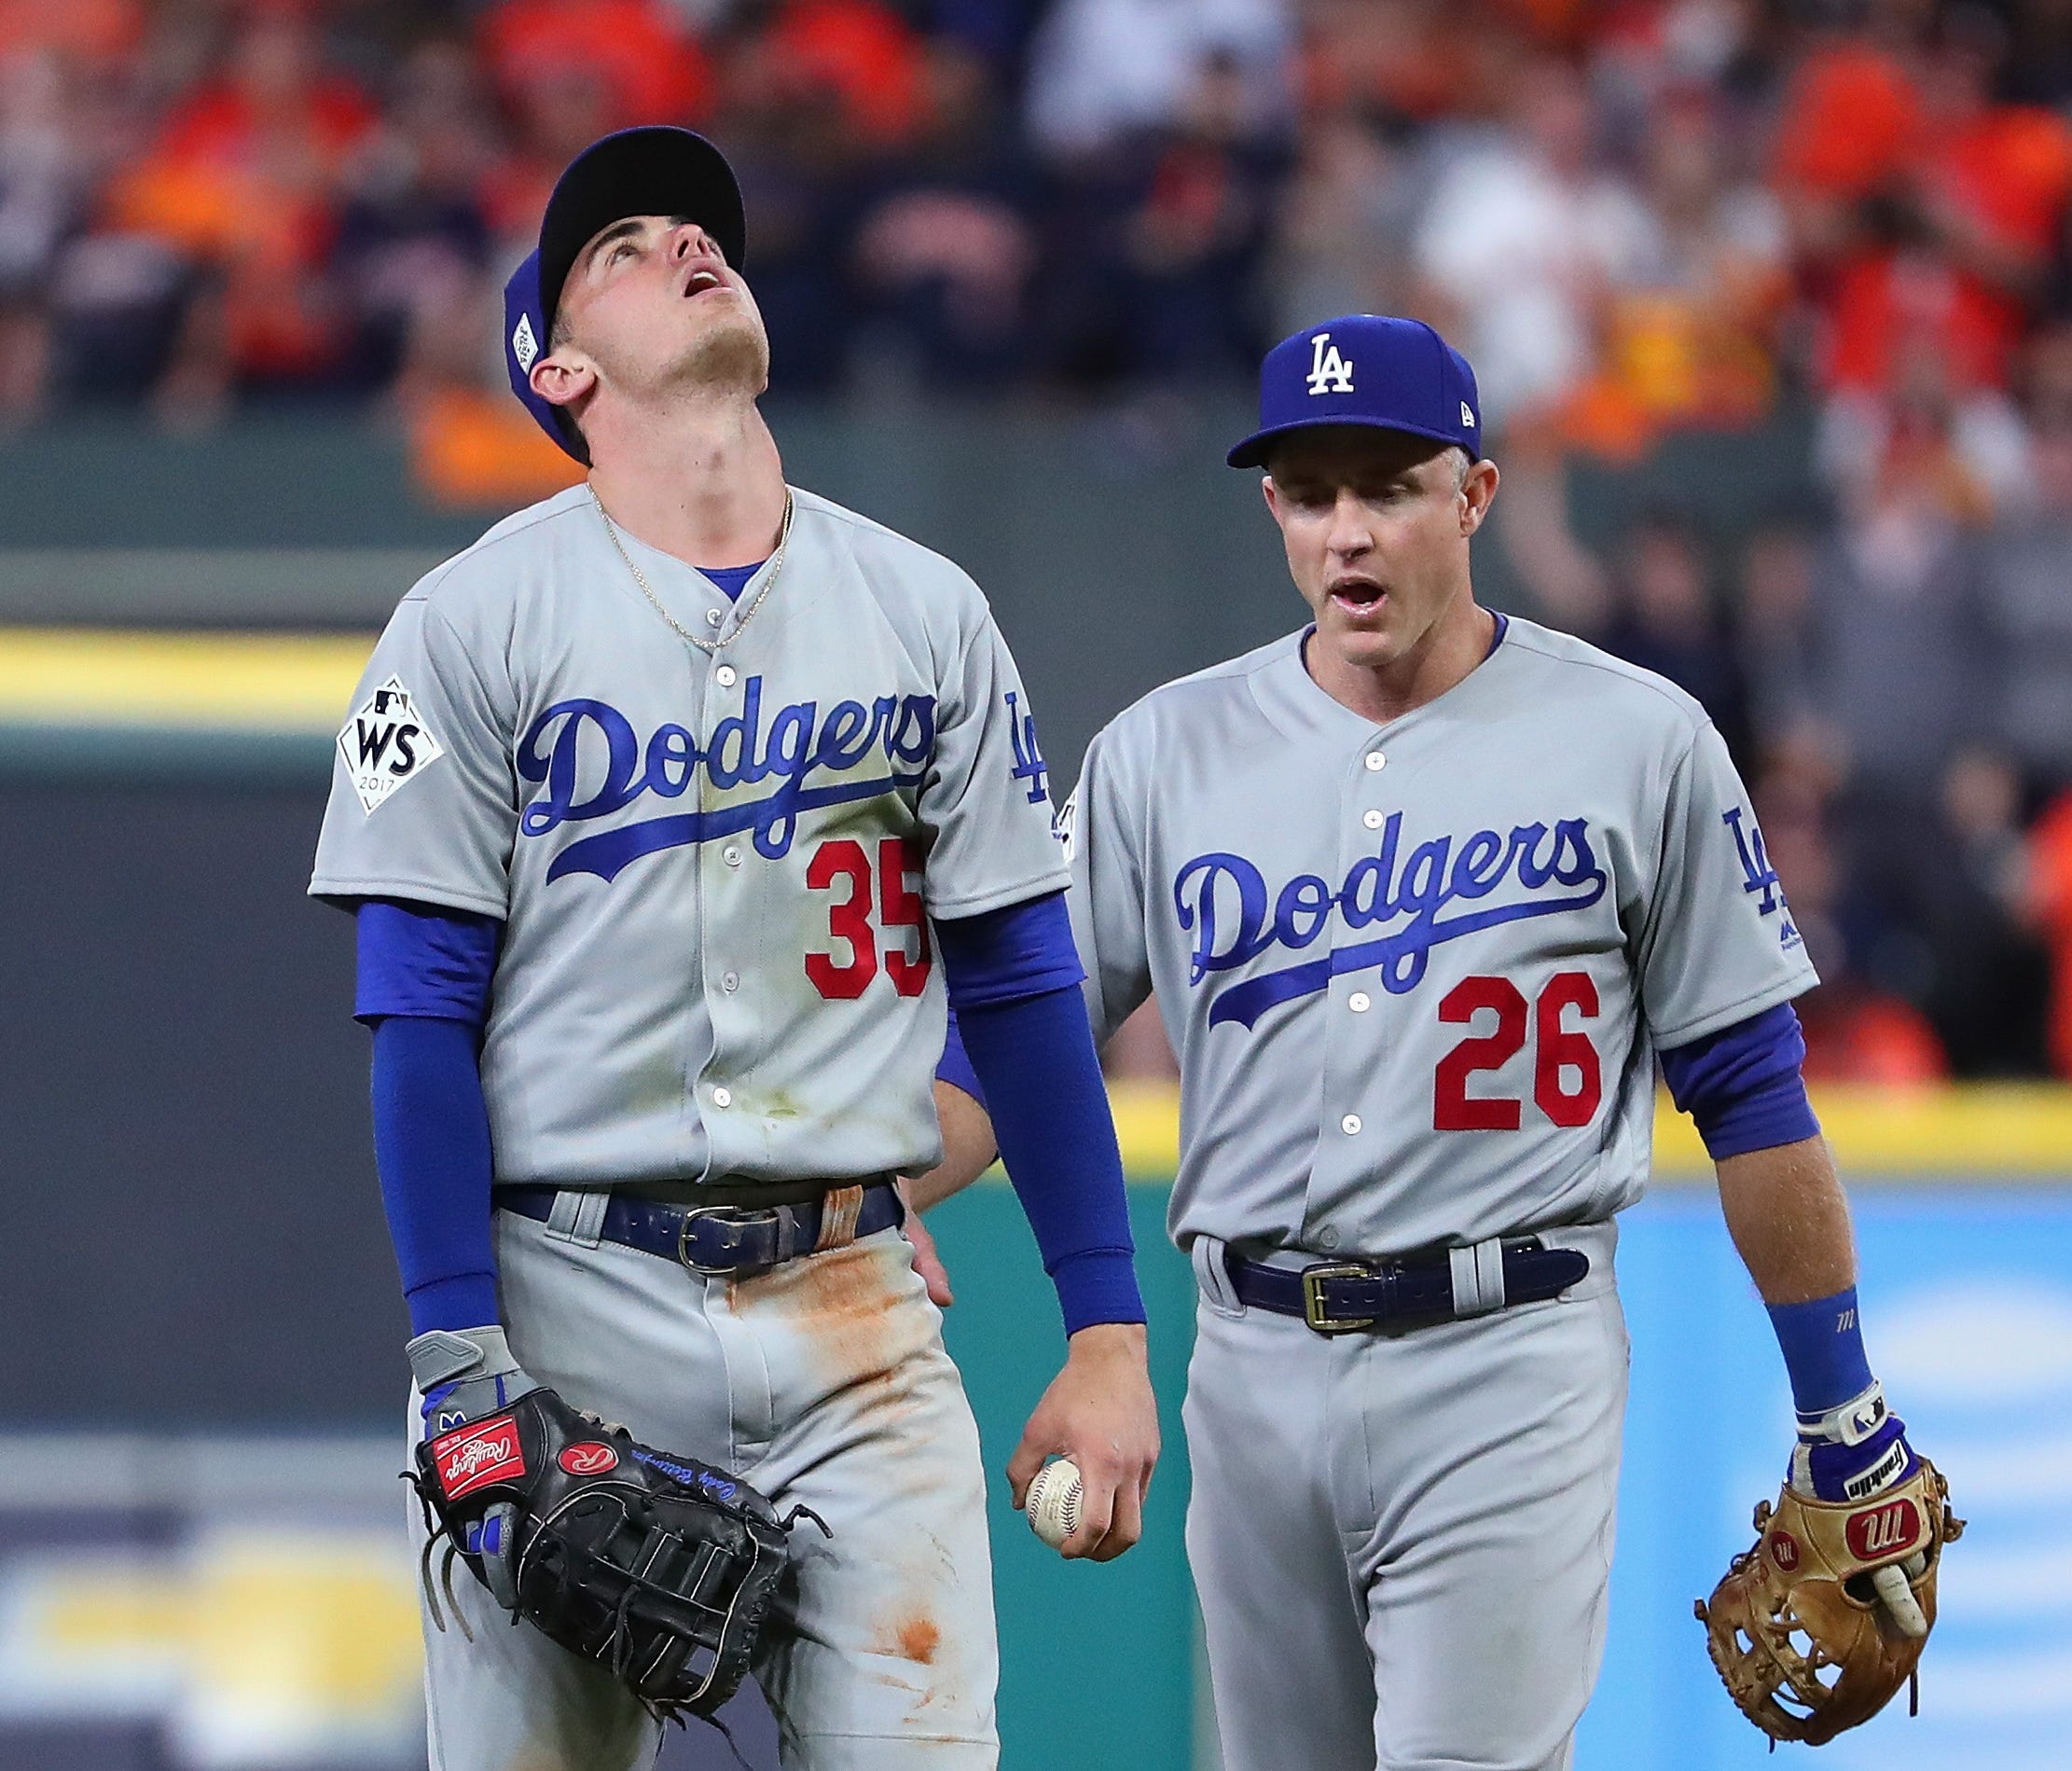 Cody Bellinger is hitless in the World Series, and struck out four times in Game 3.